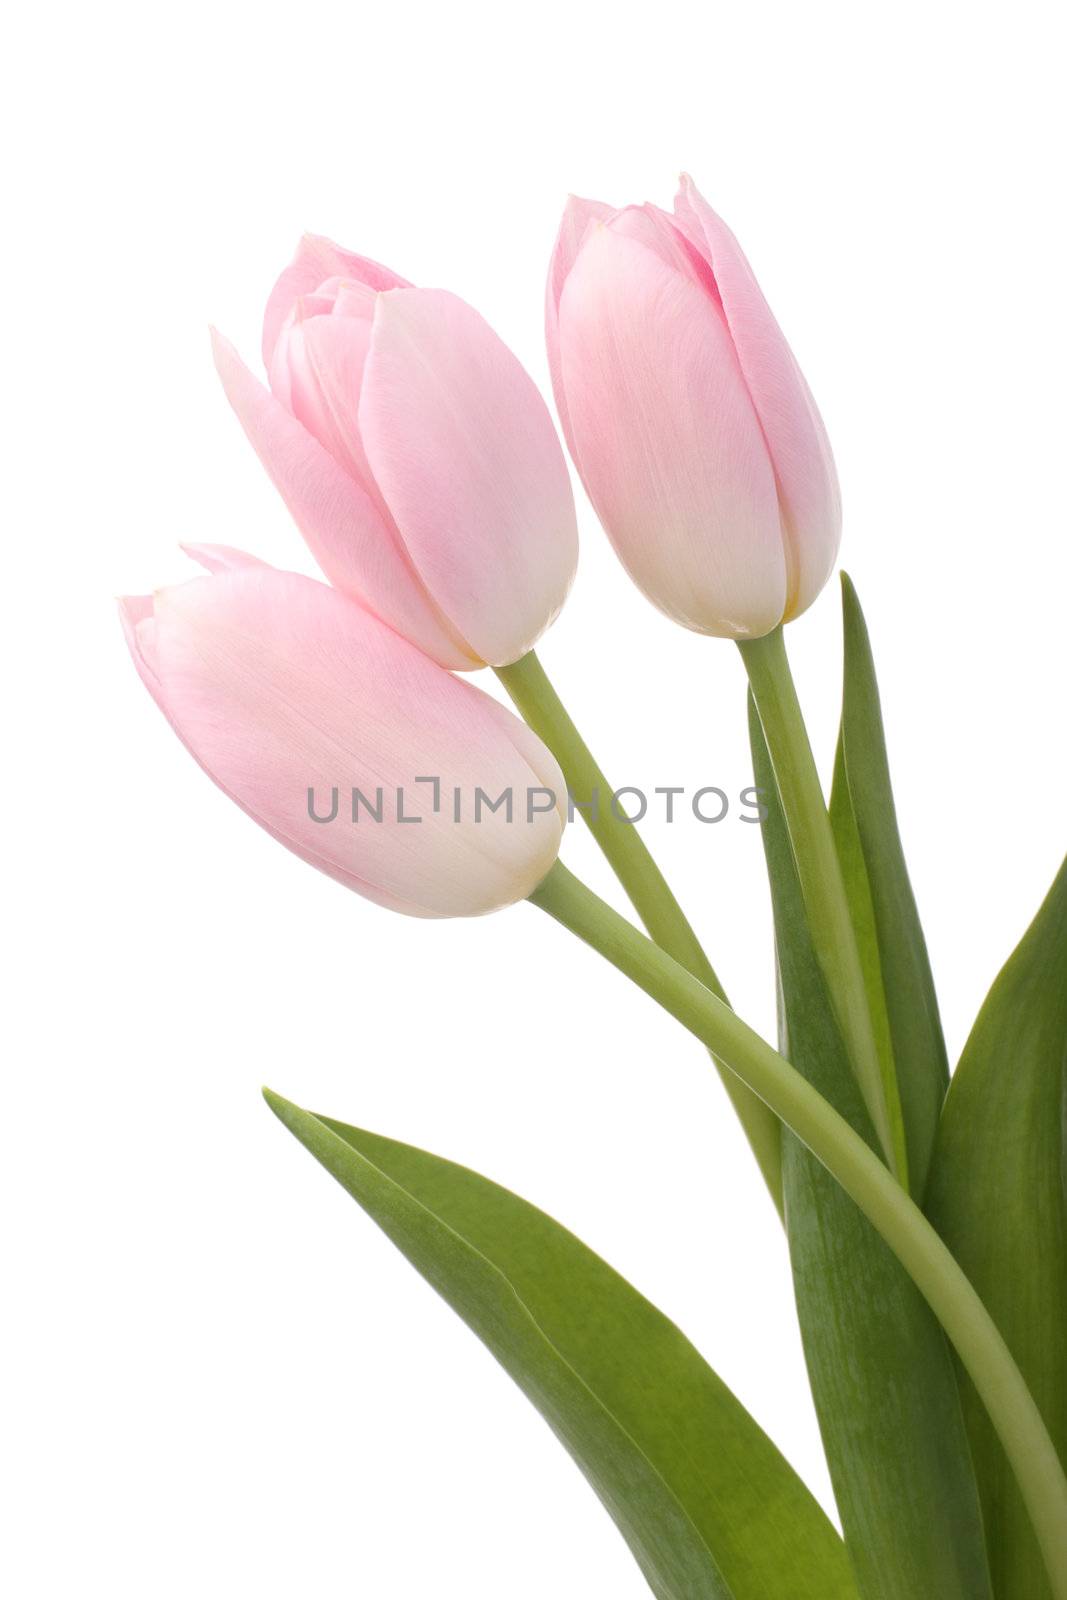 Light pink tulips on white background